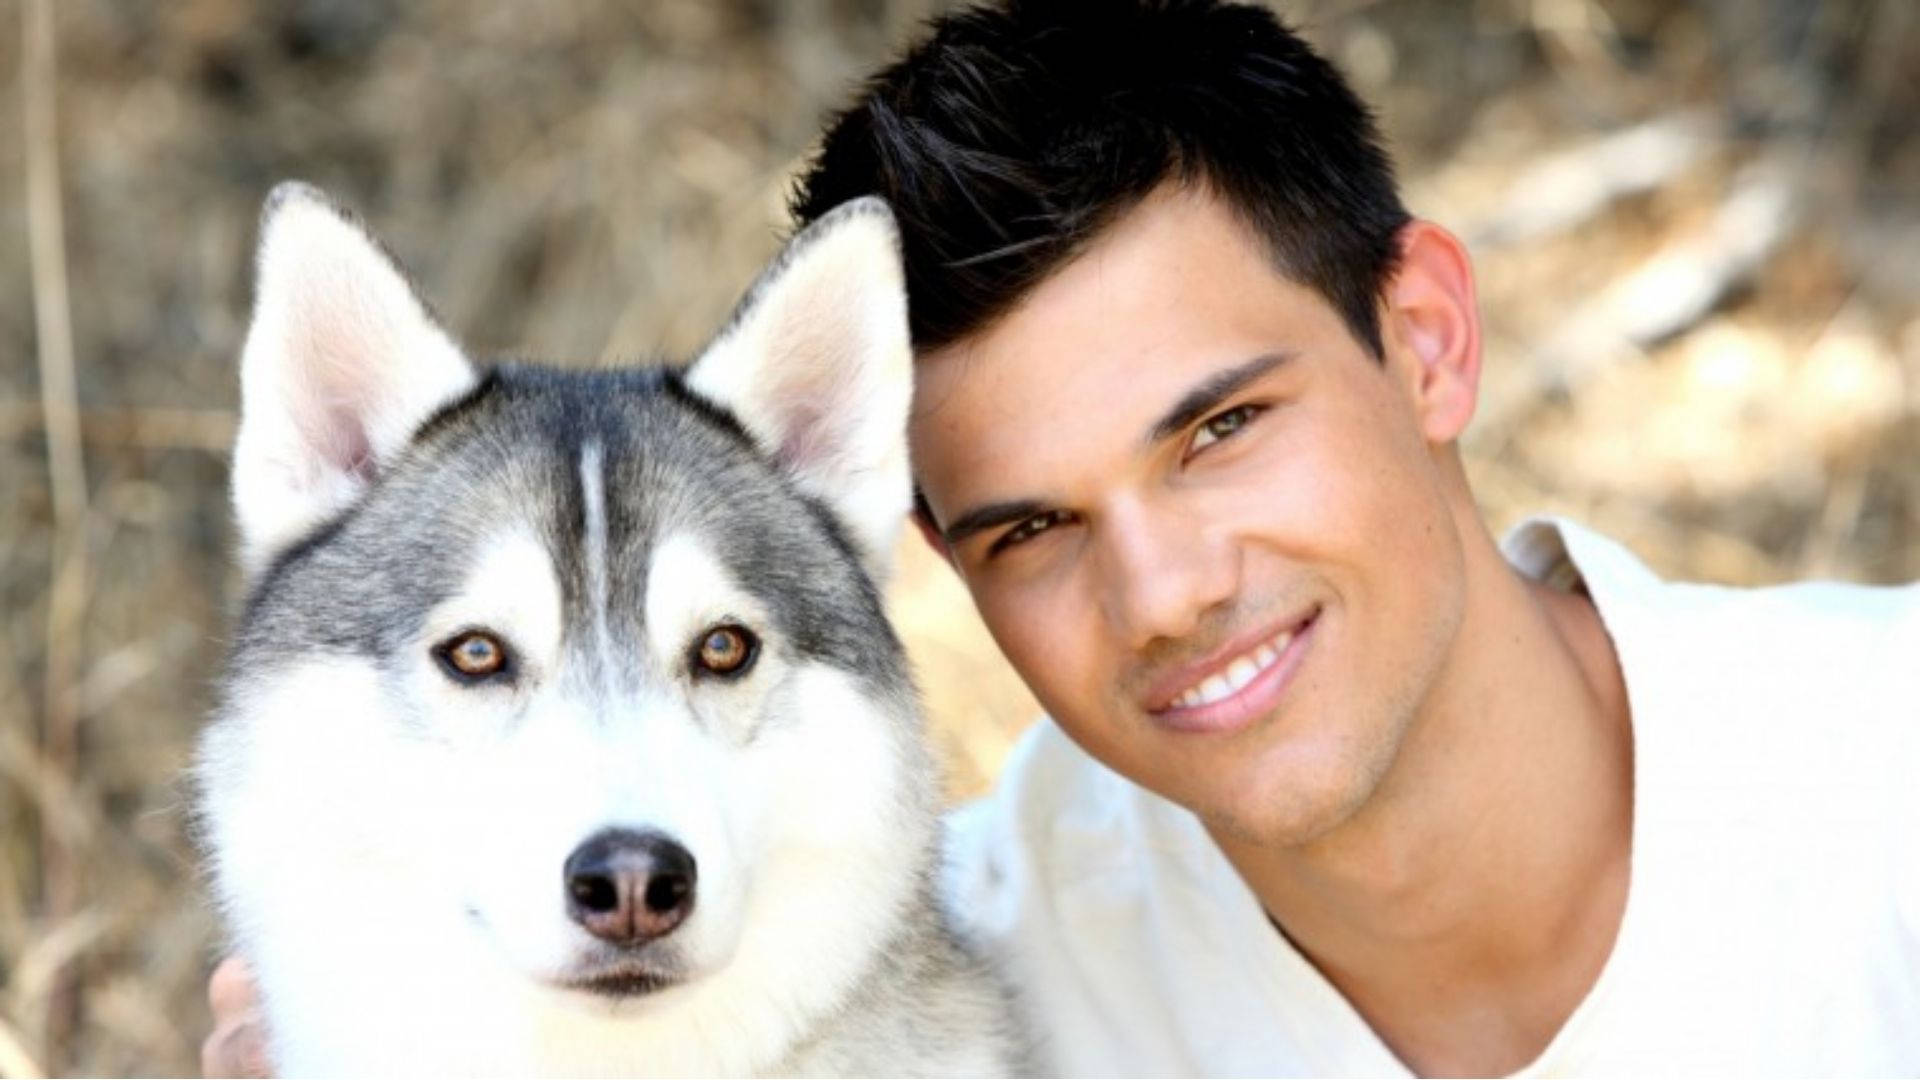 Taylor Lautner With Husky